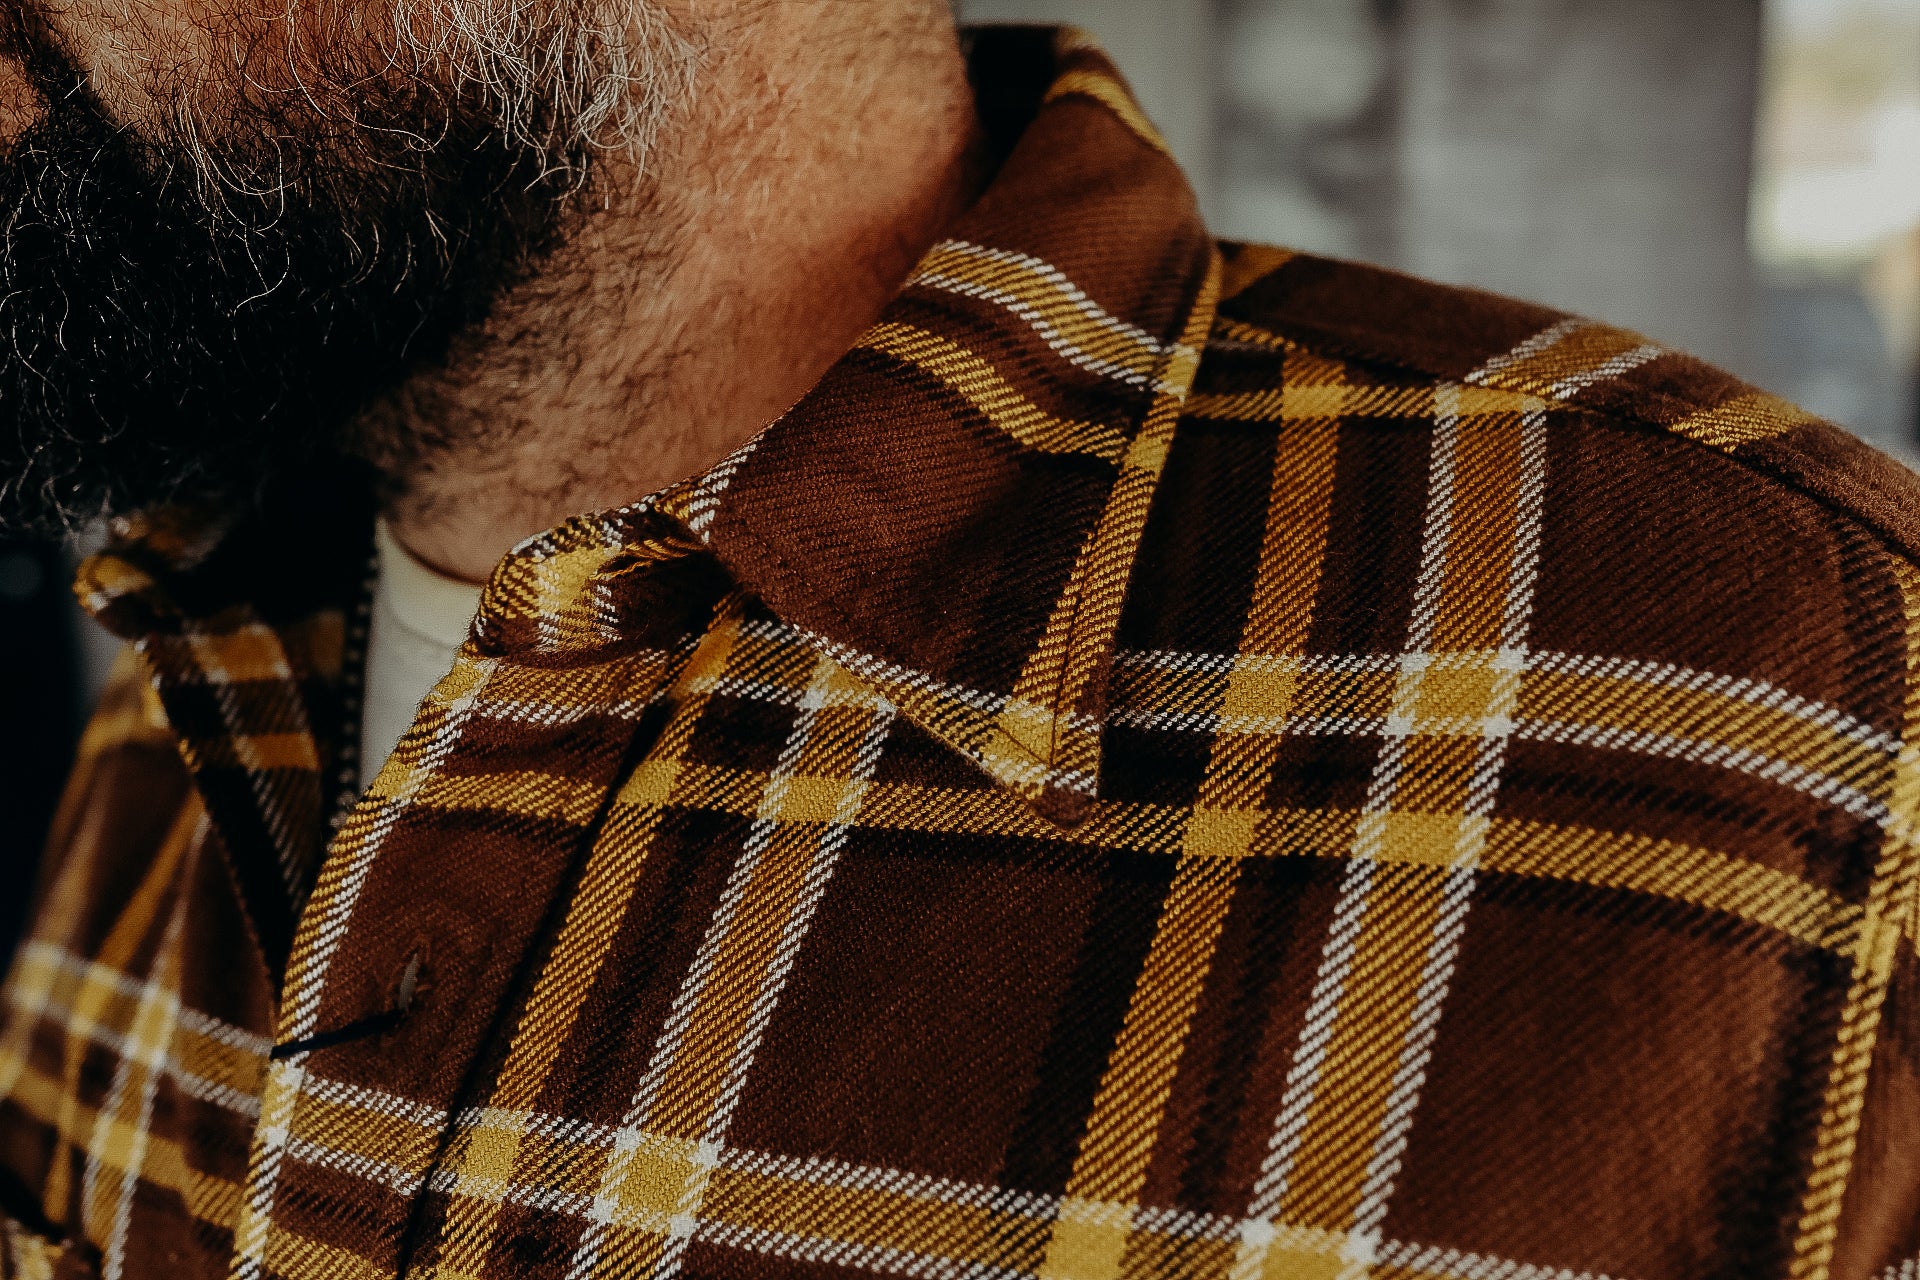 Ultra Heavy Flannel Crazy Check Work Shirt - UPS Brown